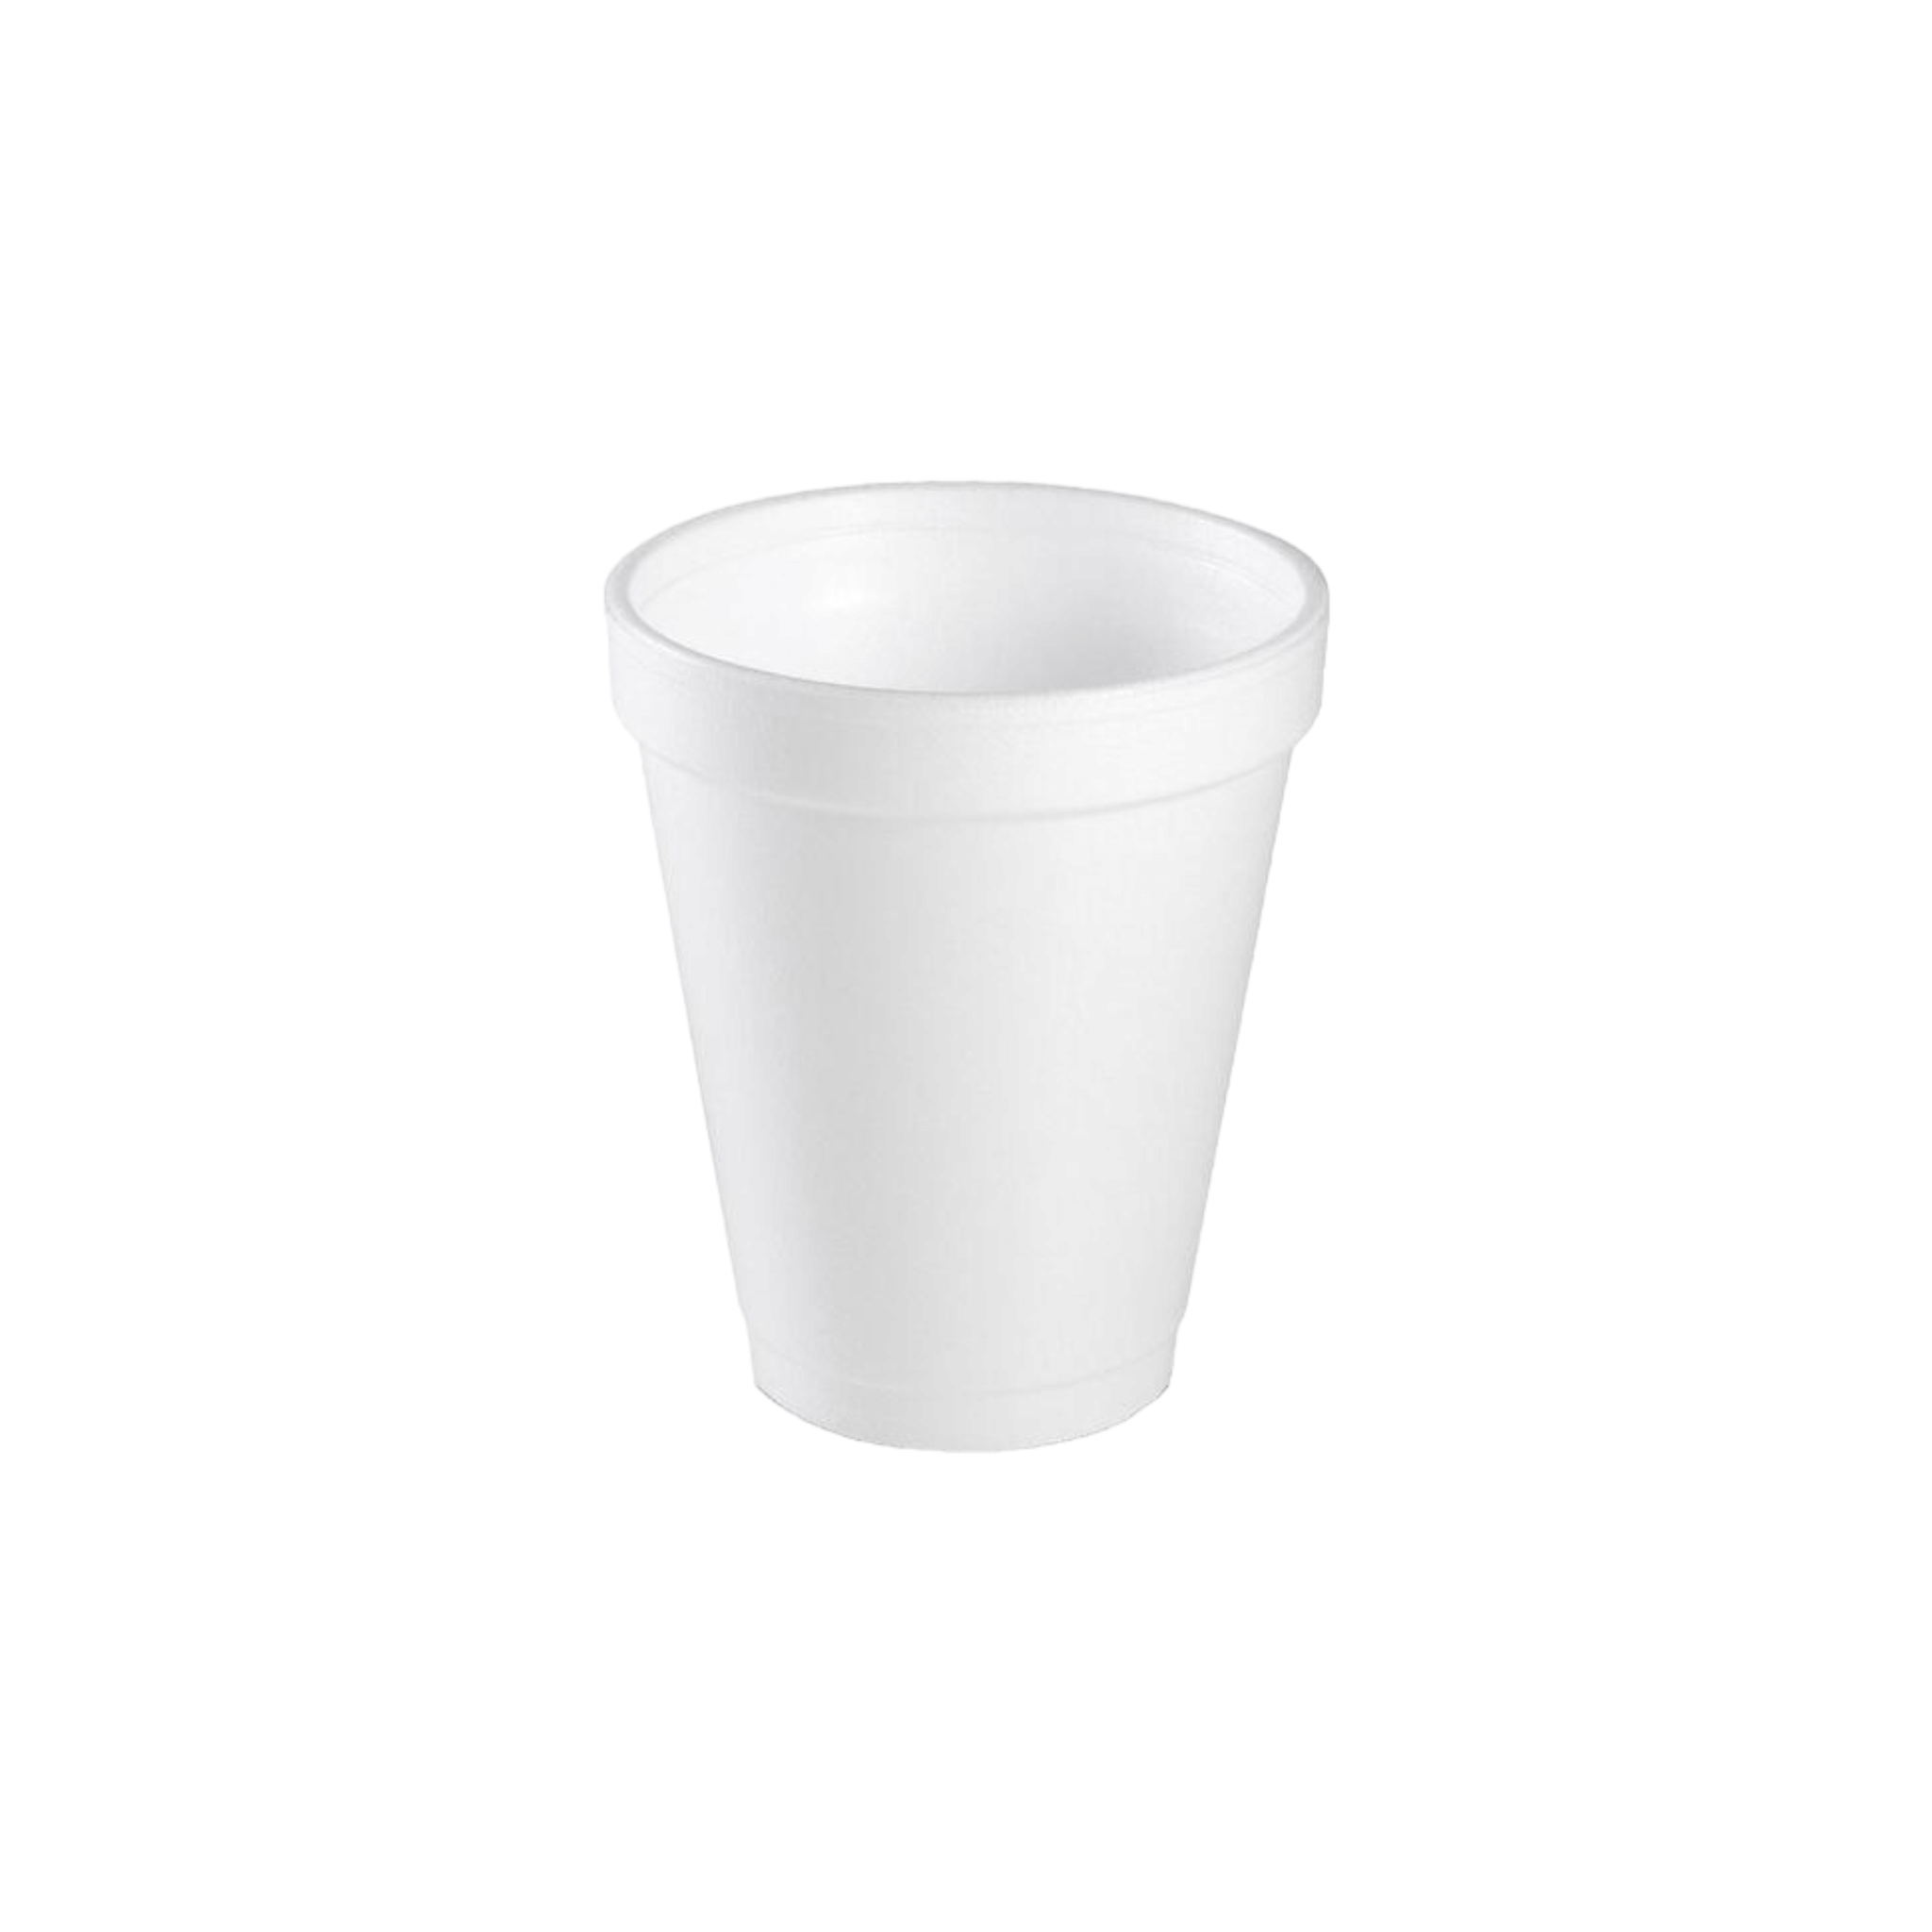 250ml Foam Cups Polystyrene HC.8 Disposable 100pack